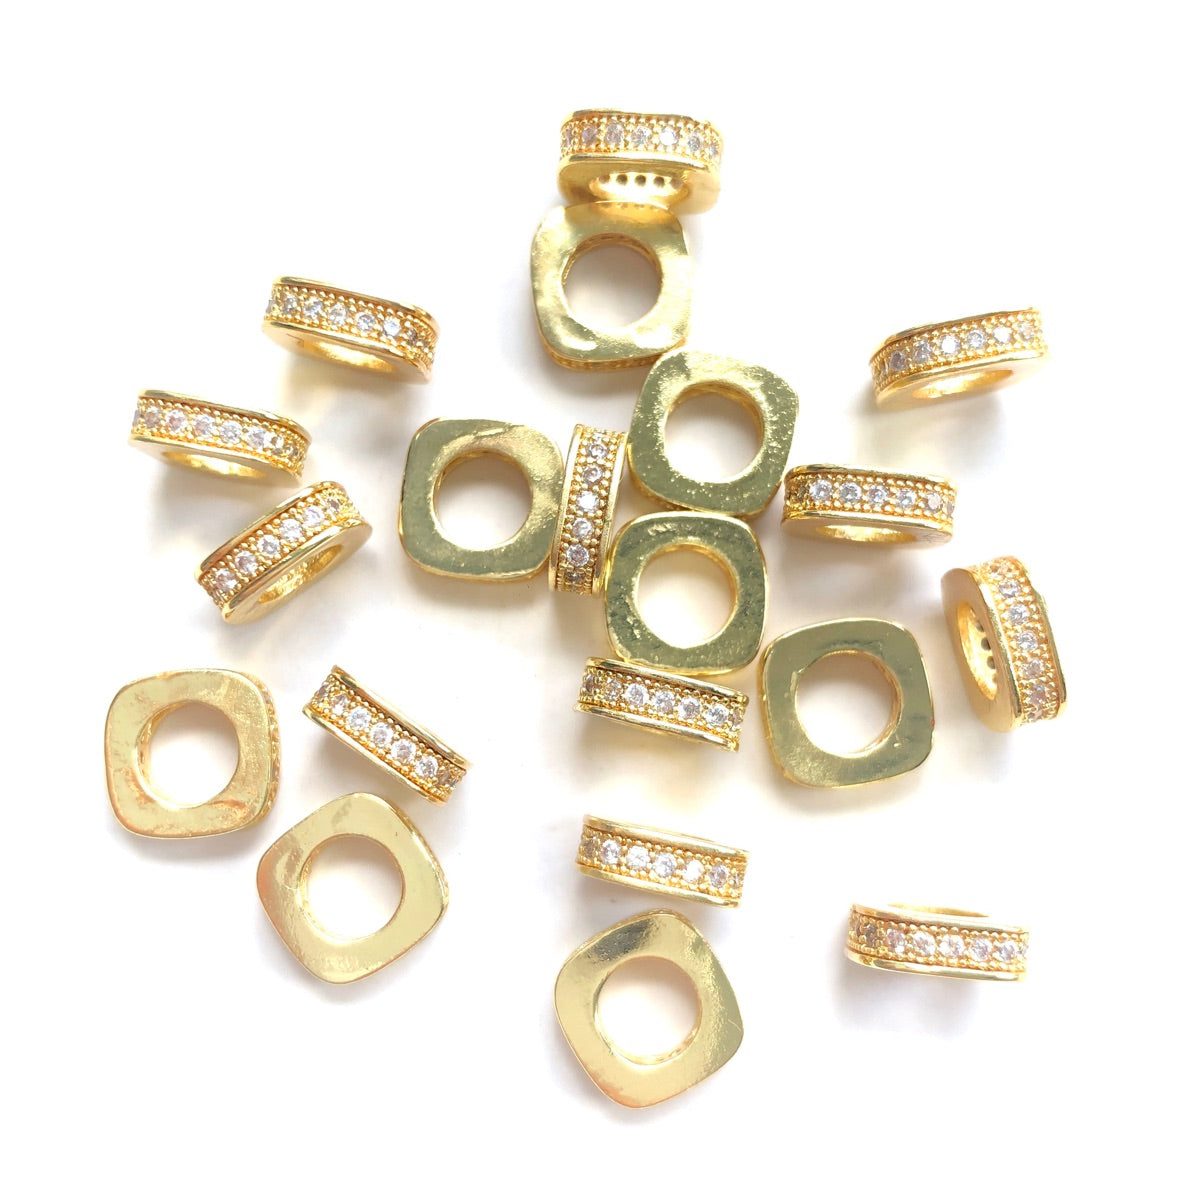 10-20-50pcs/lot 8mm CZ Paved Square Rondelle Wheel Spacers Gold CZ Paved Spacers Big Hole Beads New Spacers Arrivals Rondelle Beads Wholesale Charms Beads Beyond